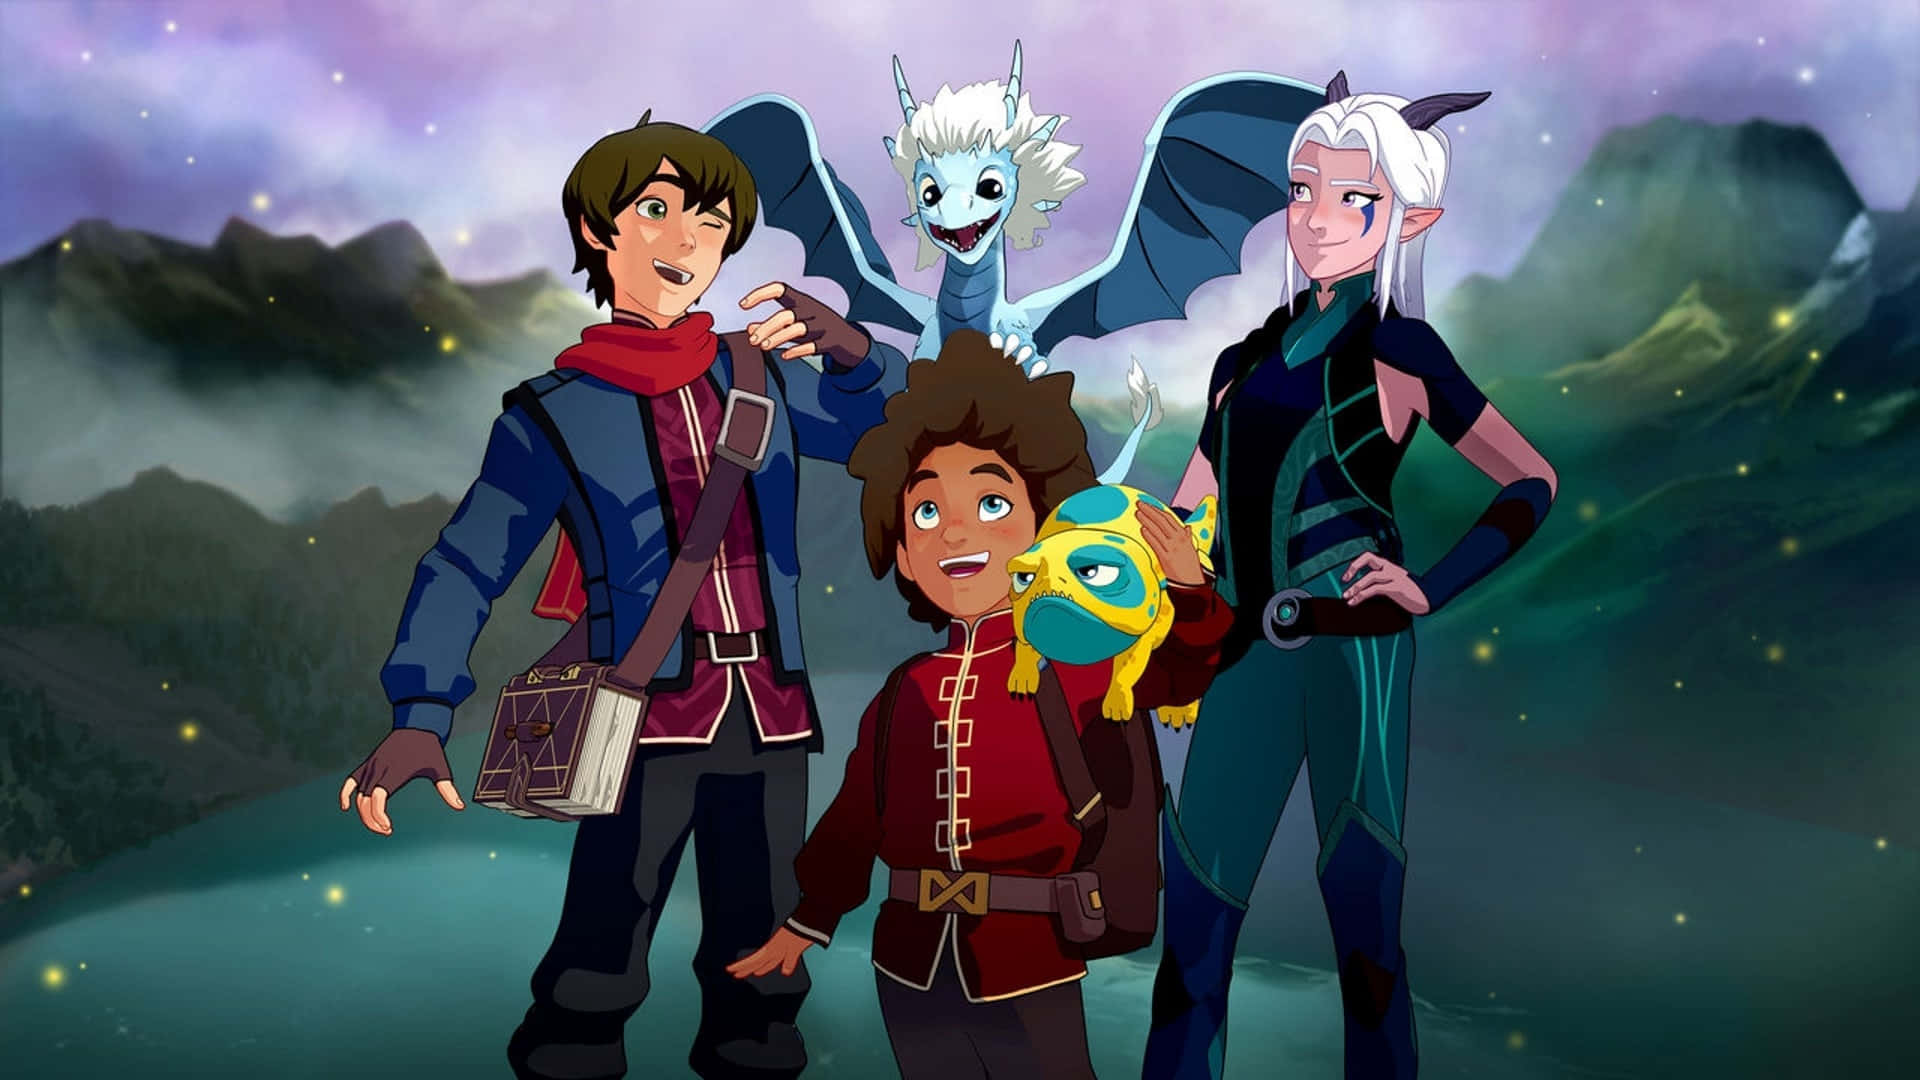 Enjoy the Power of Magic in The Dragon Prince Wallpaper